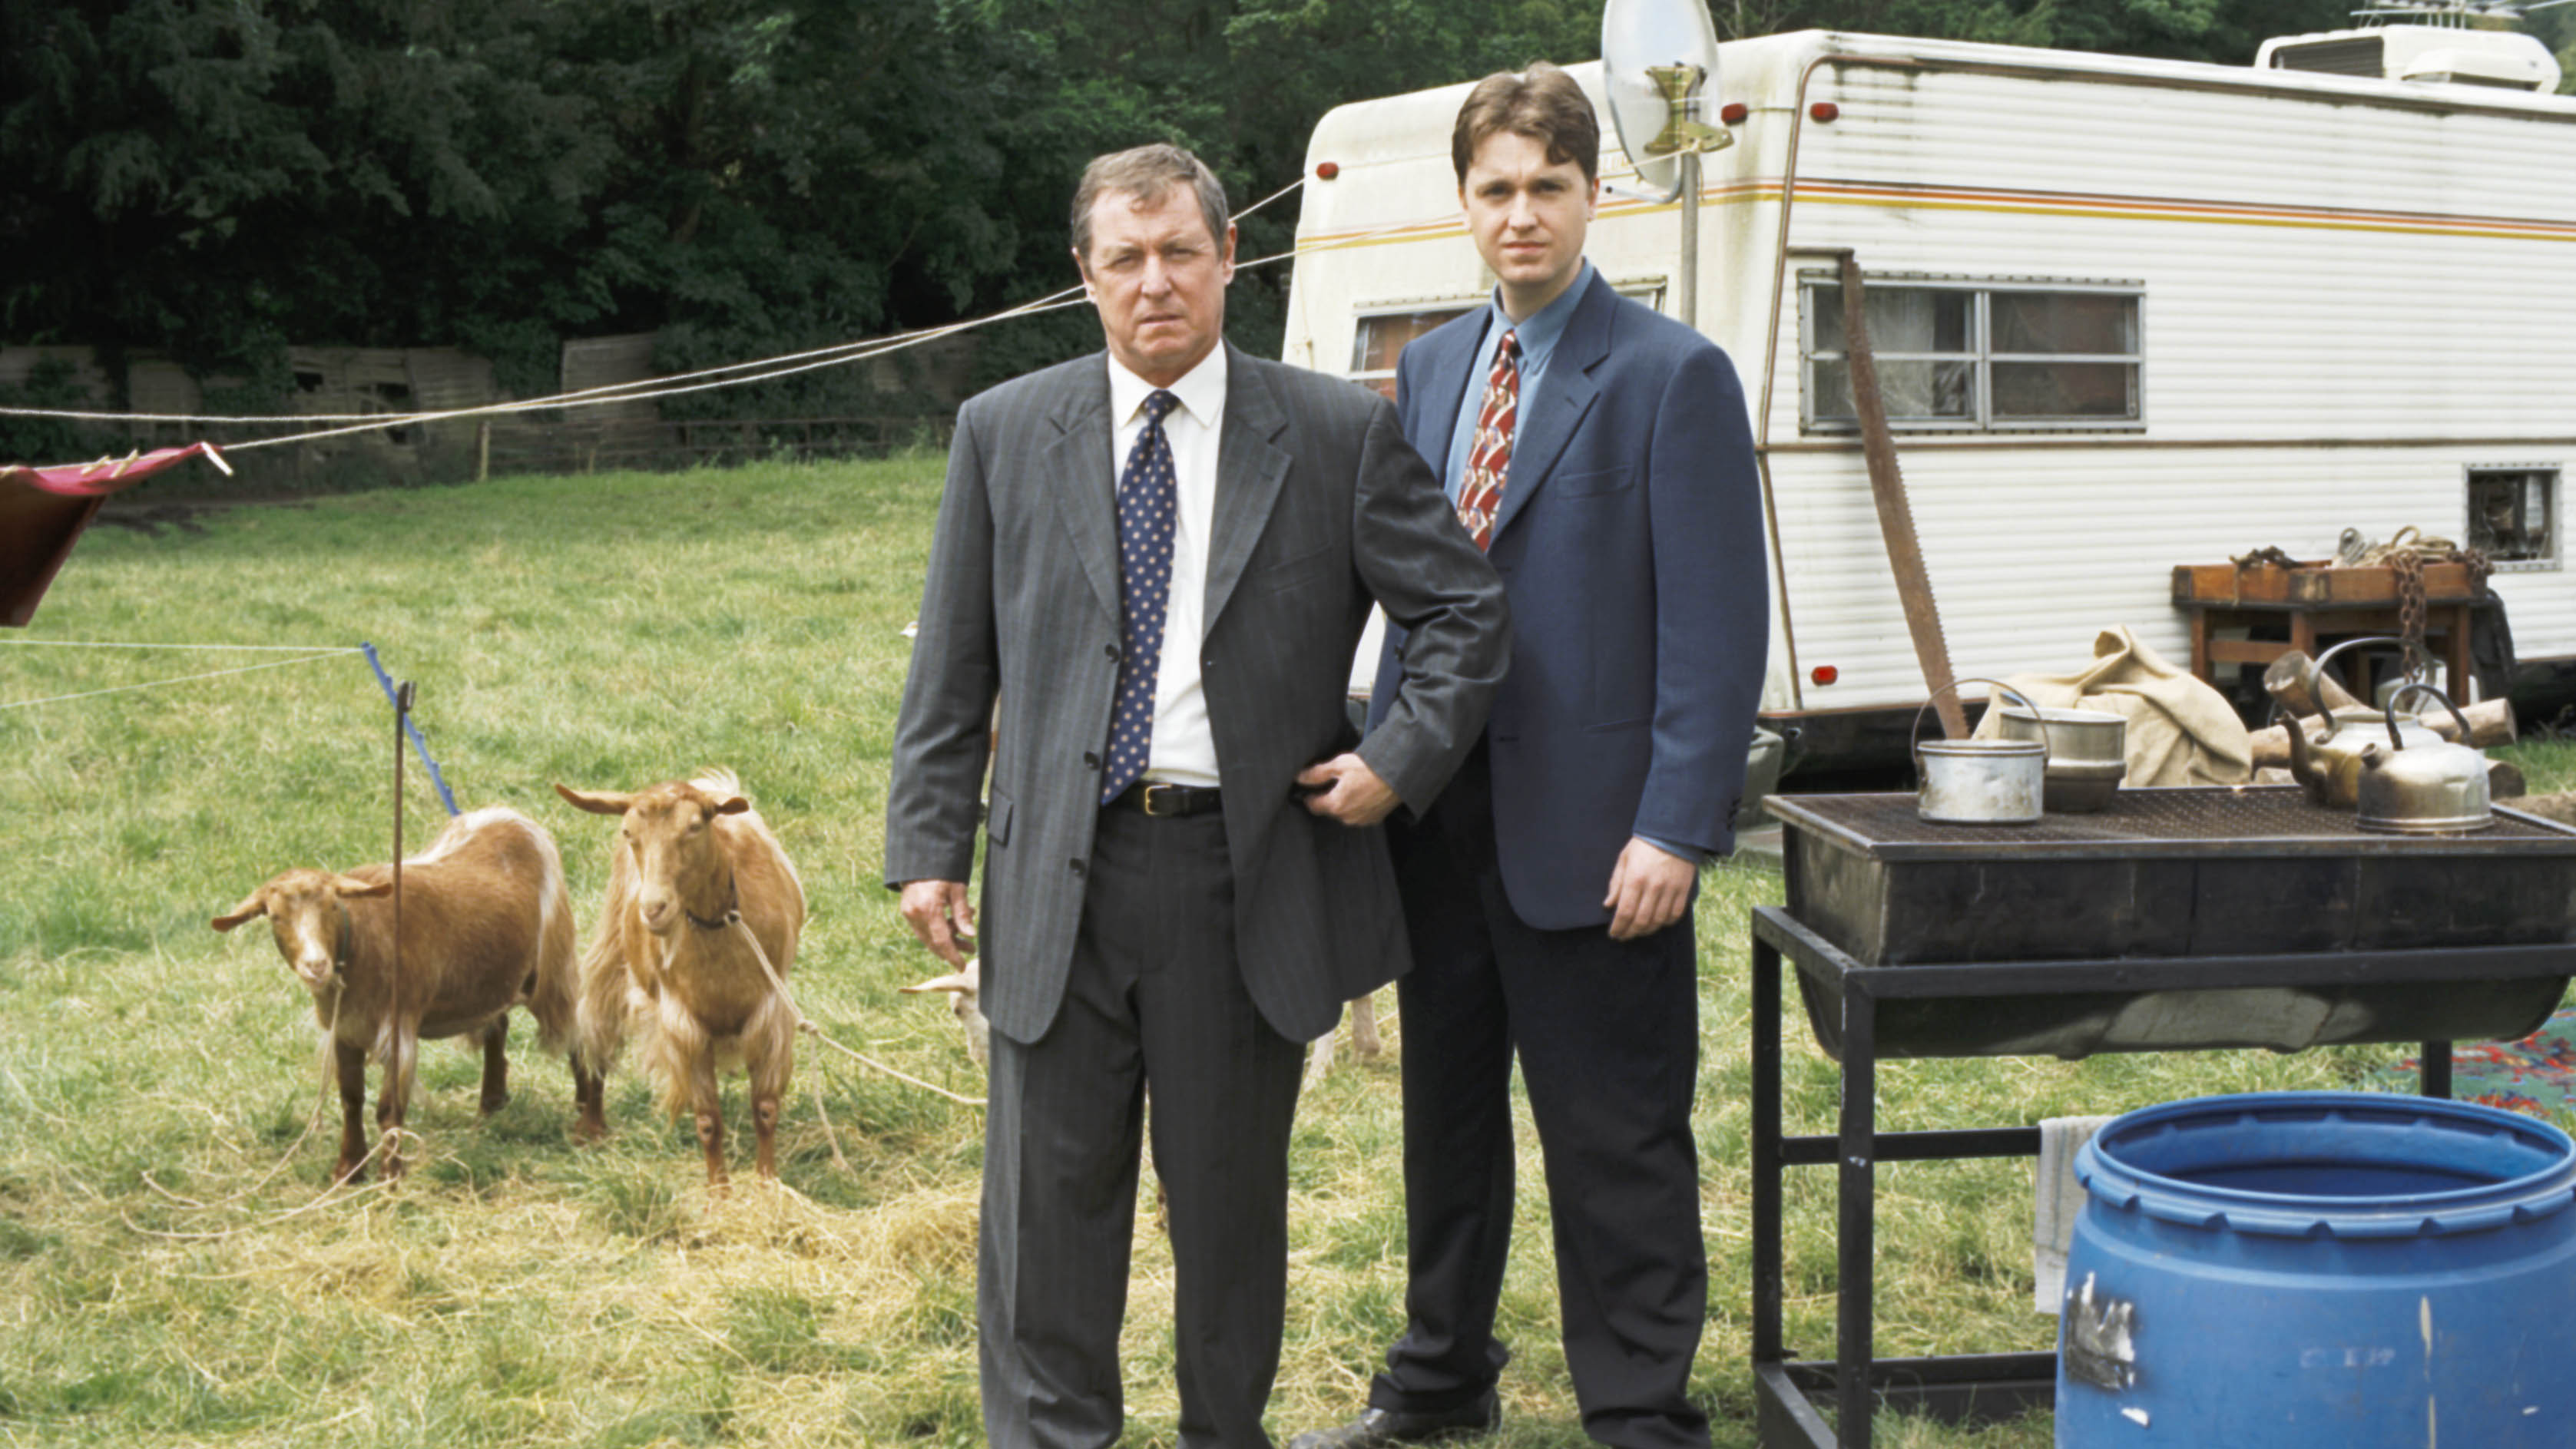 MIDSOMER MURDERS Season 2, "Blood Will Out" promo